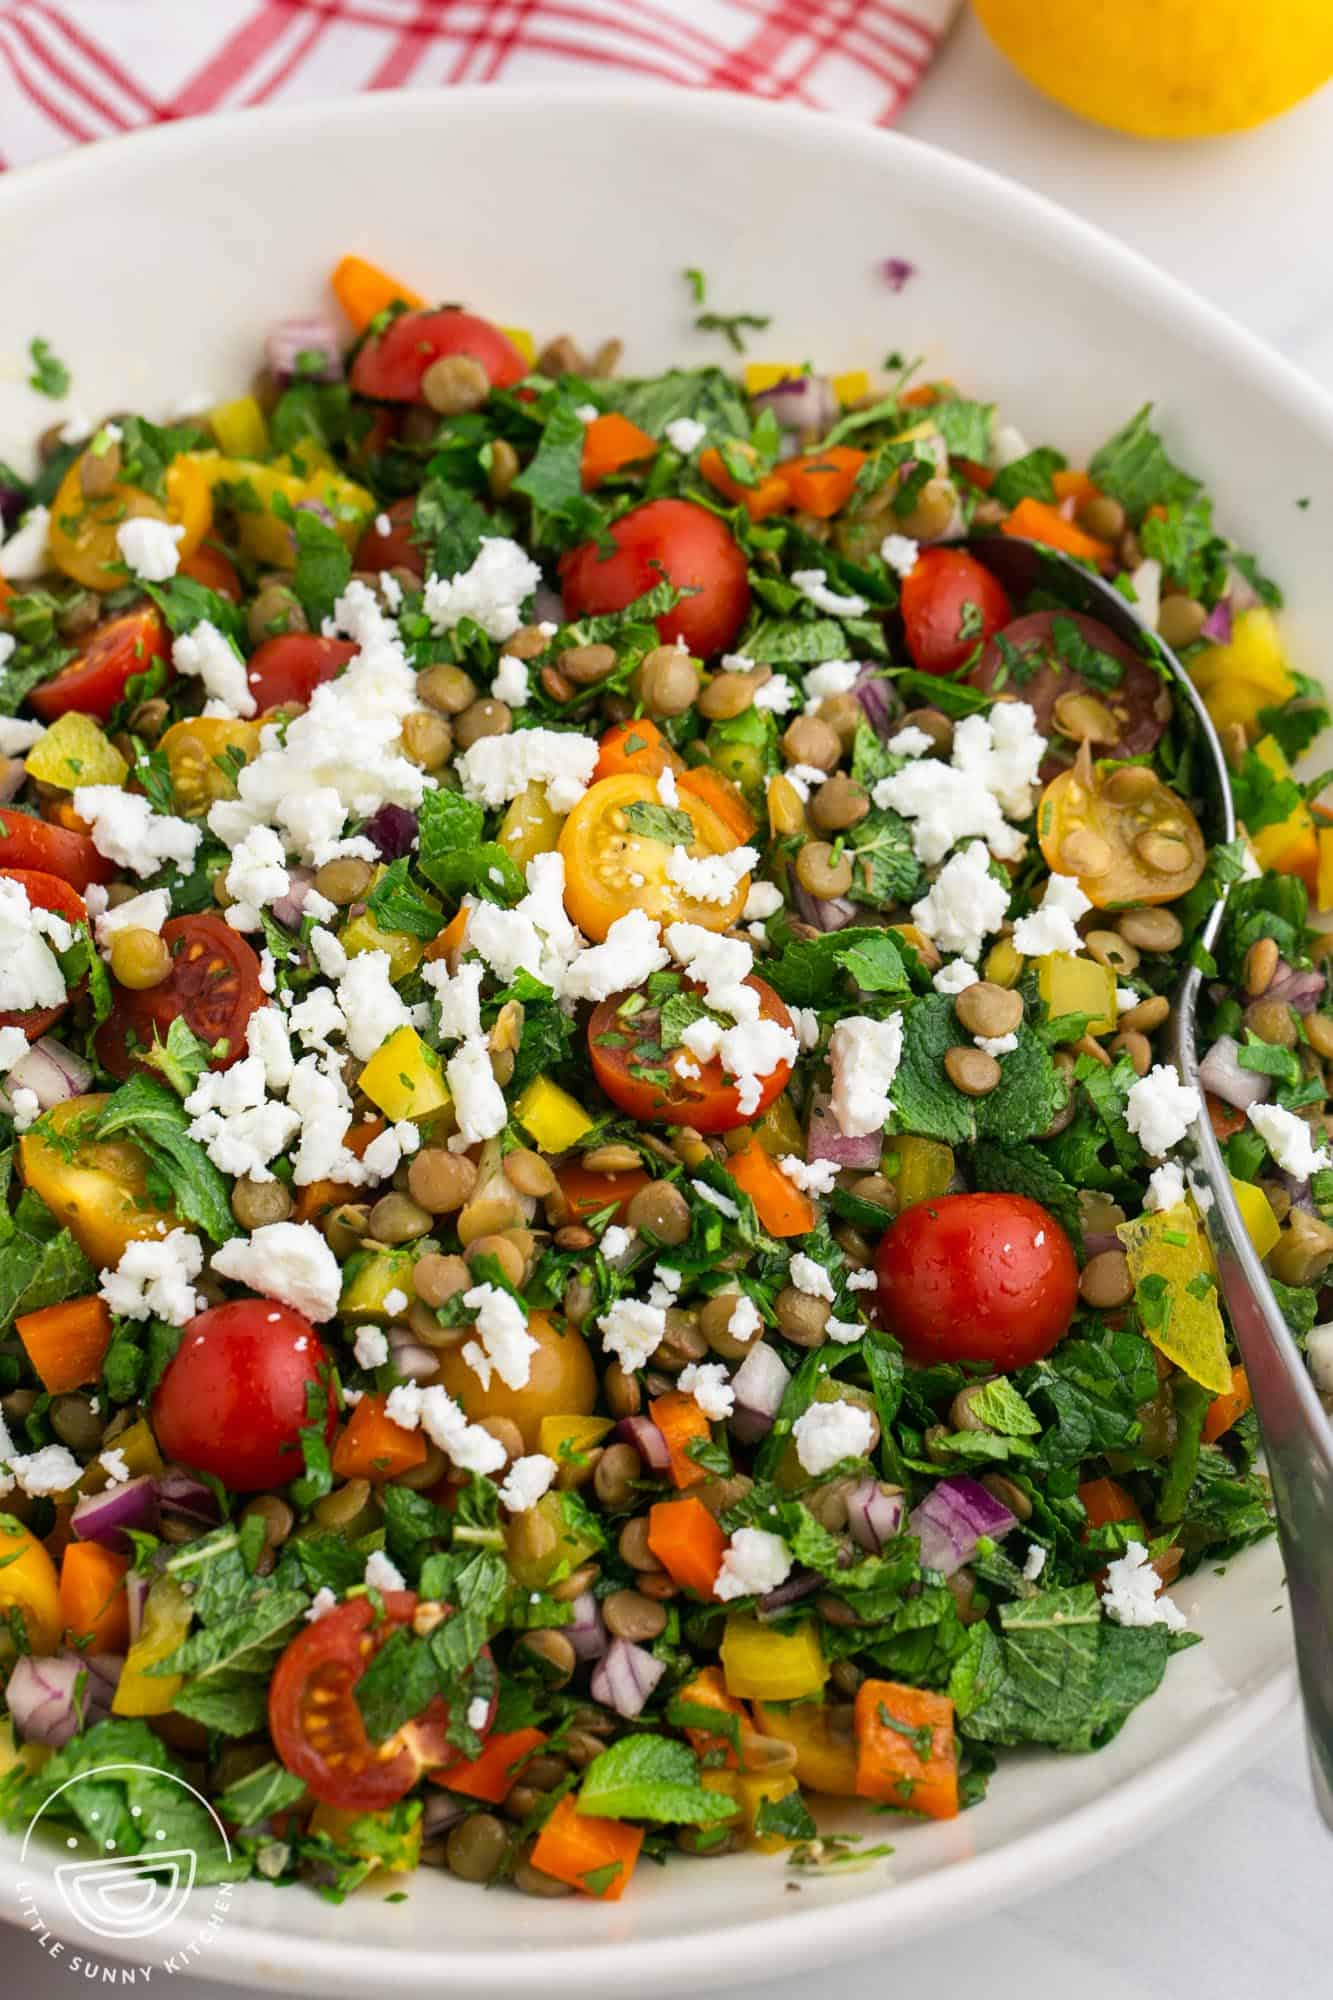 lentil salad with tomatoes, feta, herbs, in a bowl with a serving spoon.